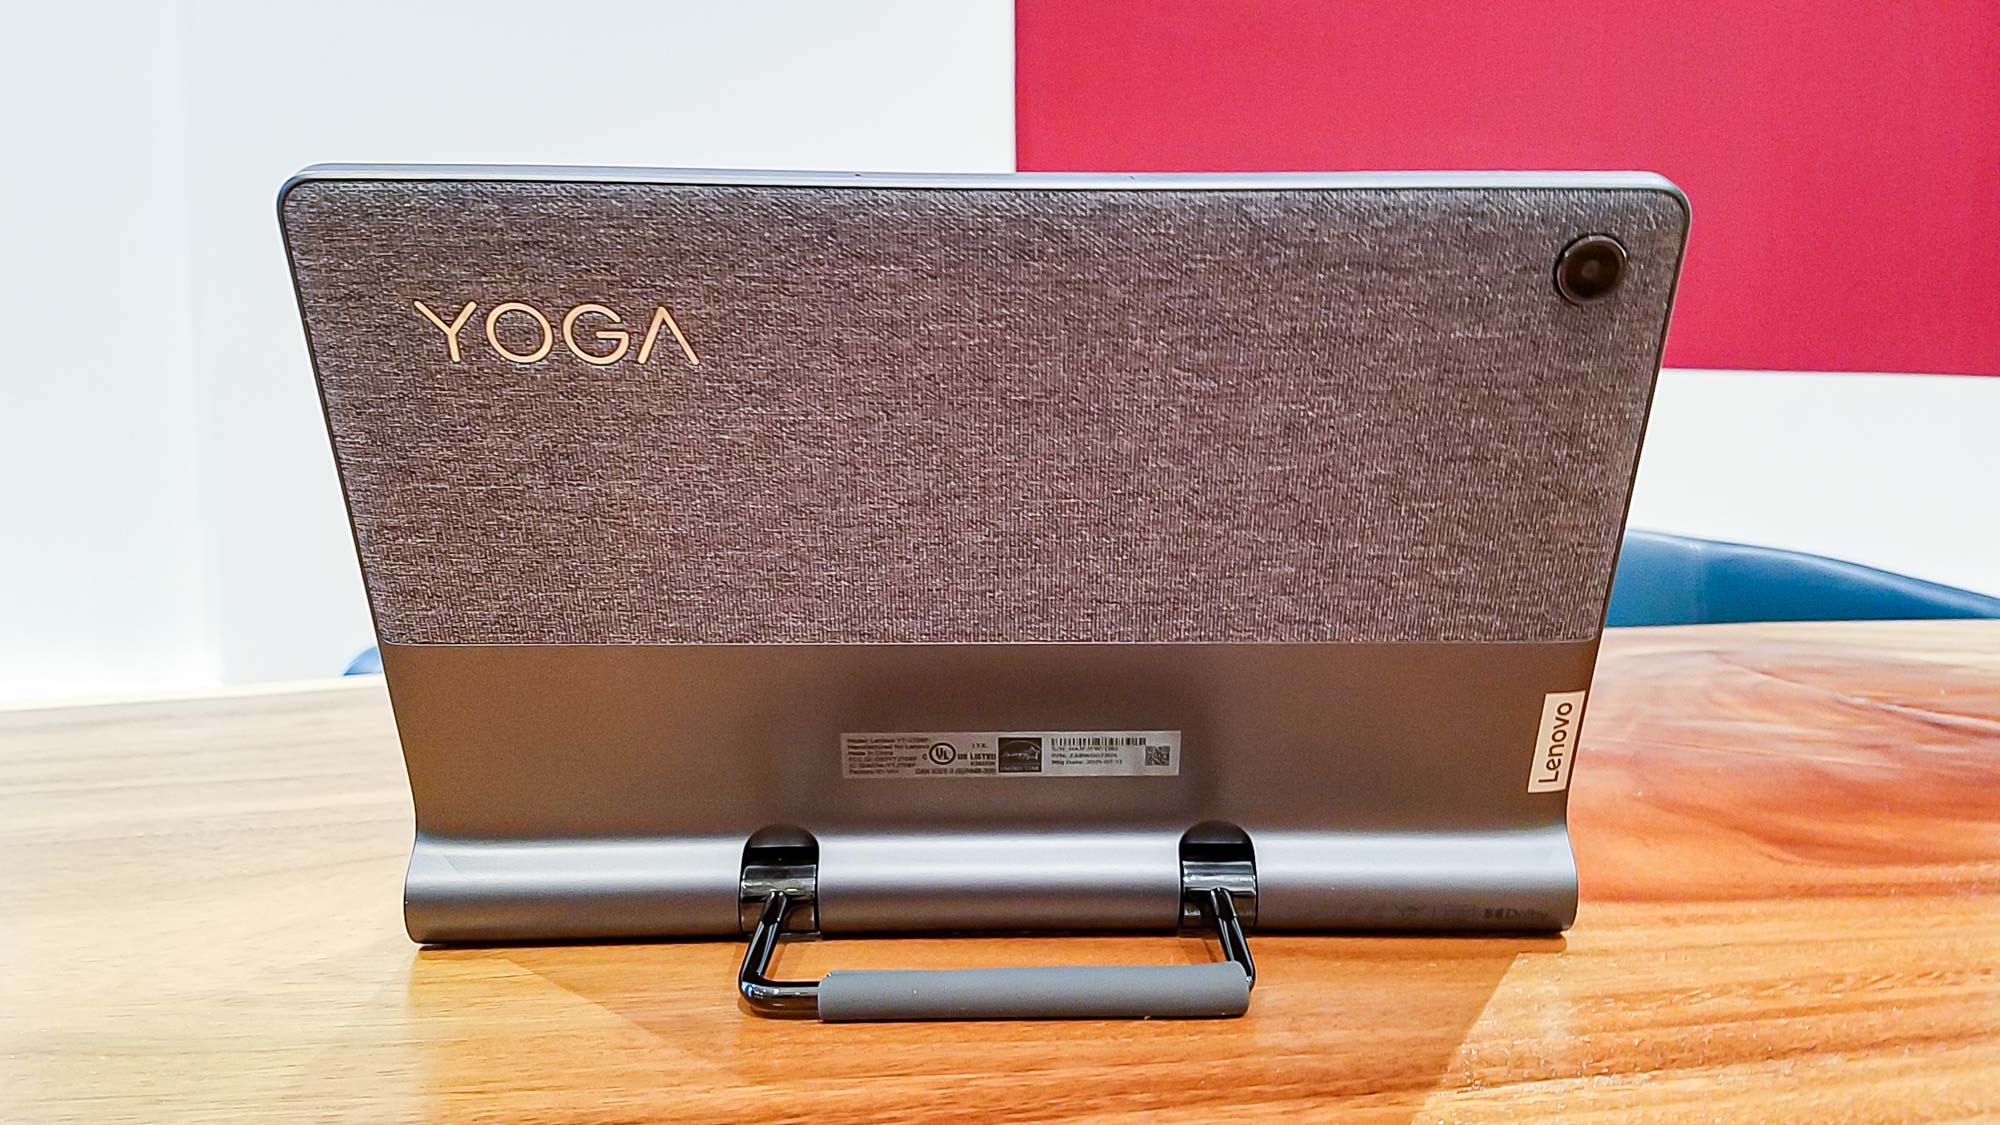 The Lenovo Yoga Tab 11's kickstand makes it easy to prop up anywhere